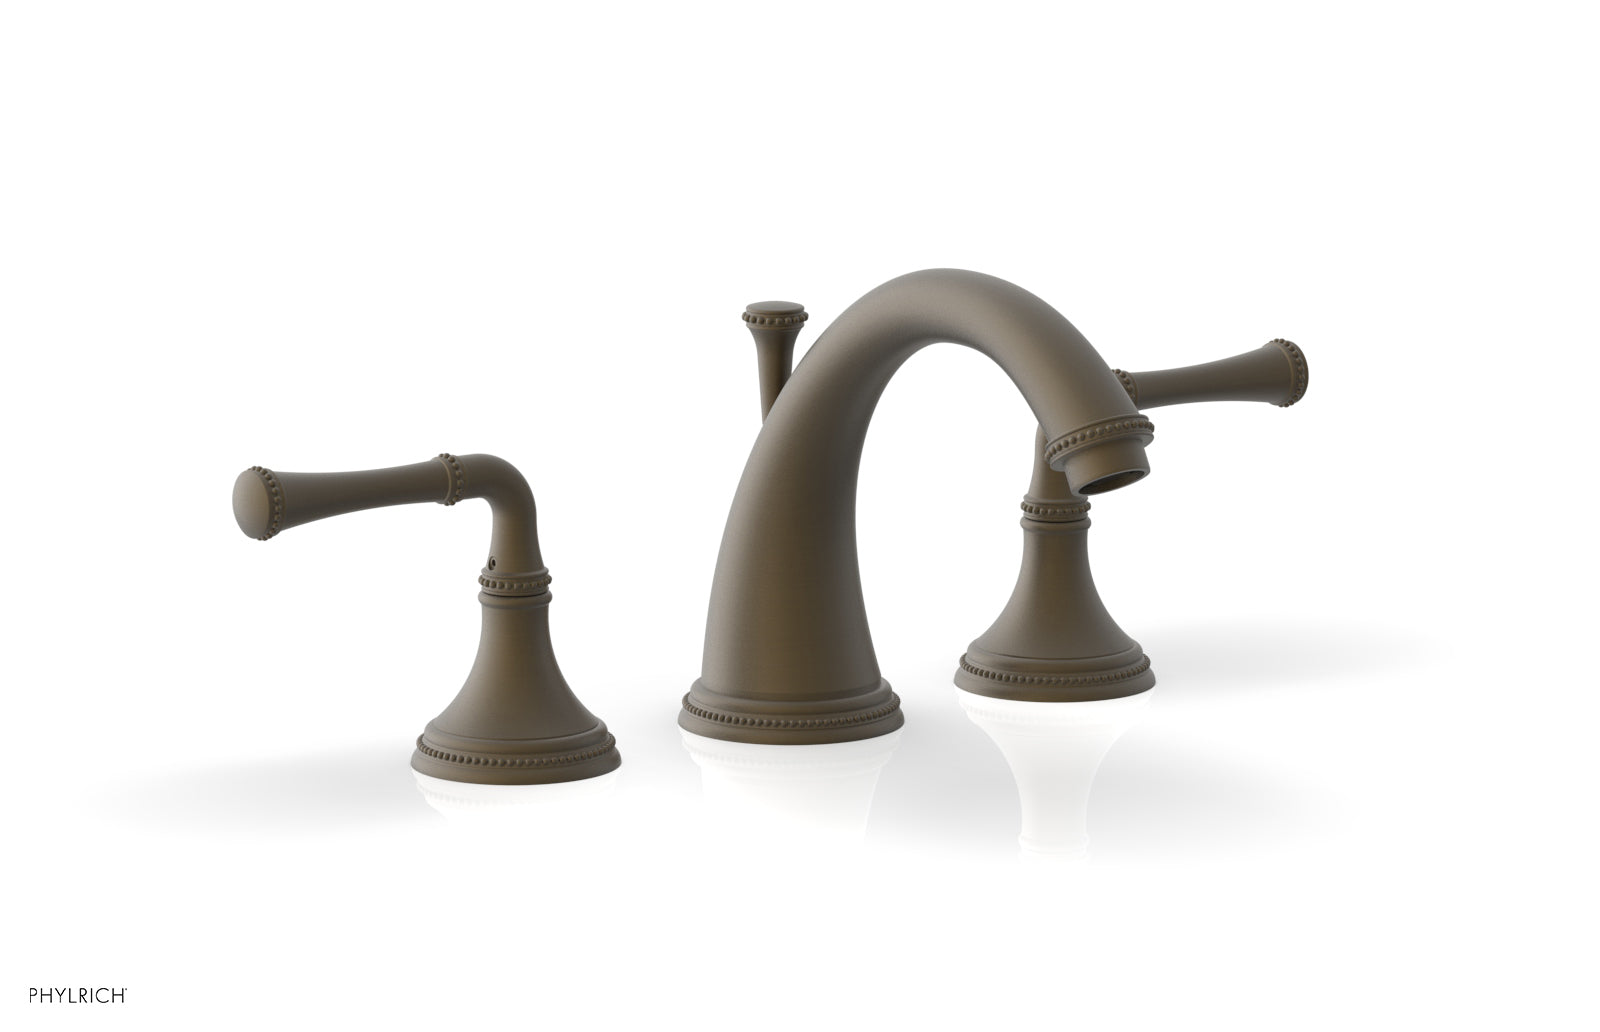 Phylrich BEADED Widespread Faucet Lever Handles